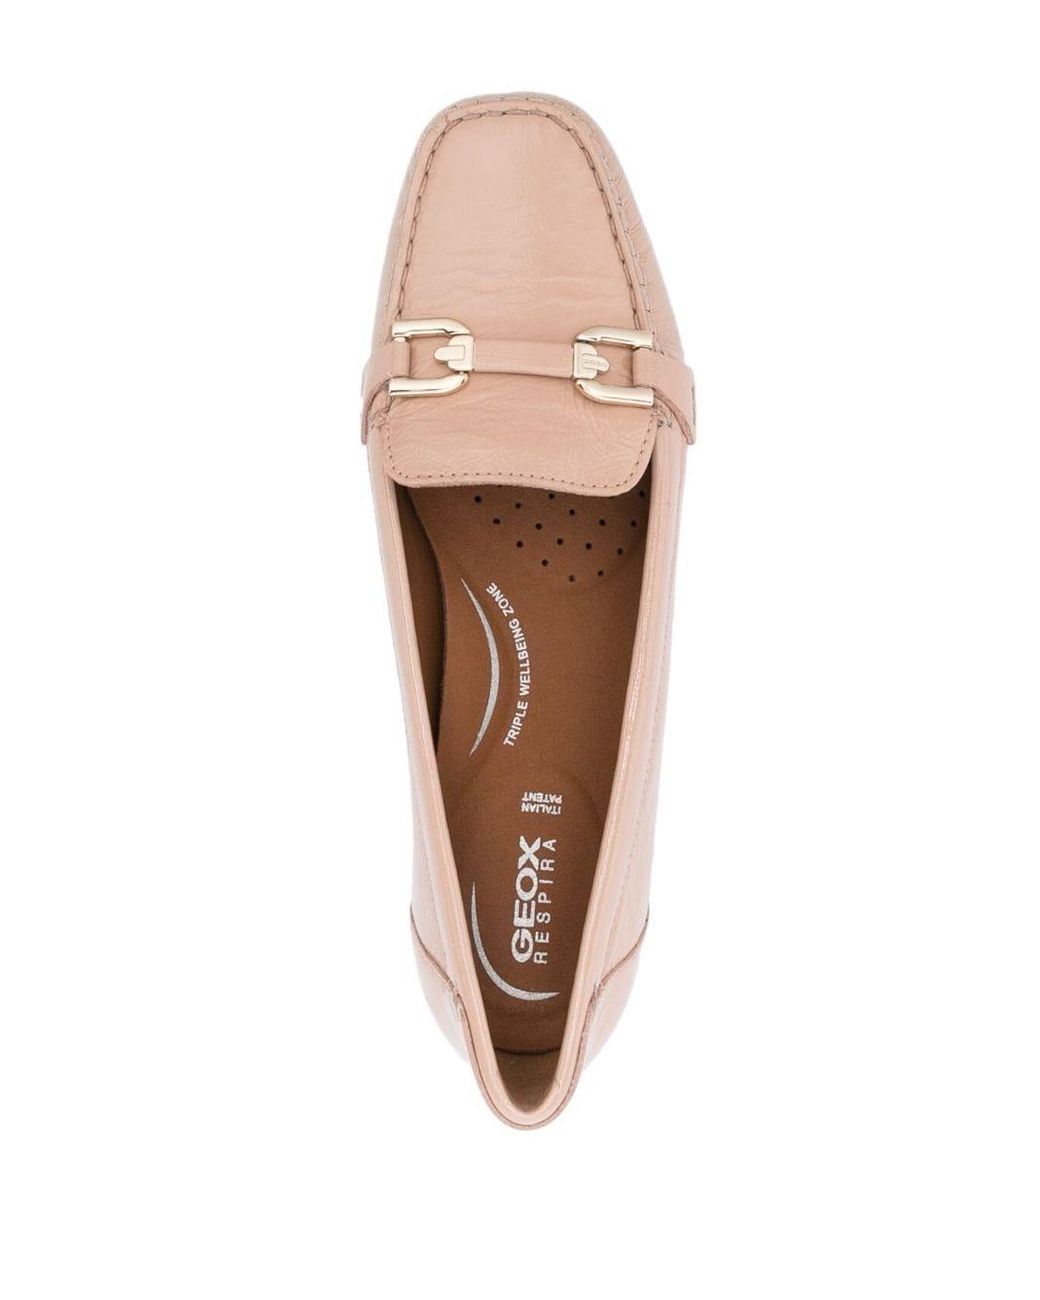 Geox Annytah Leather Ballerina Shoes in Pink | Lyst